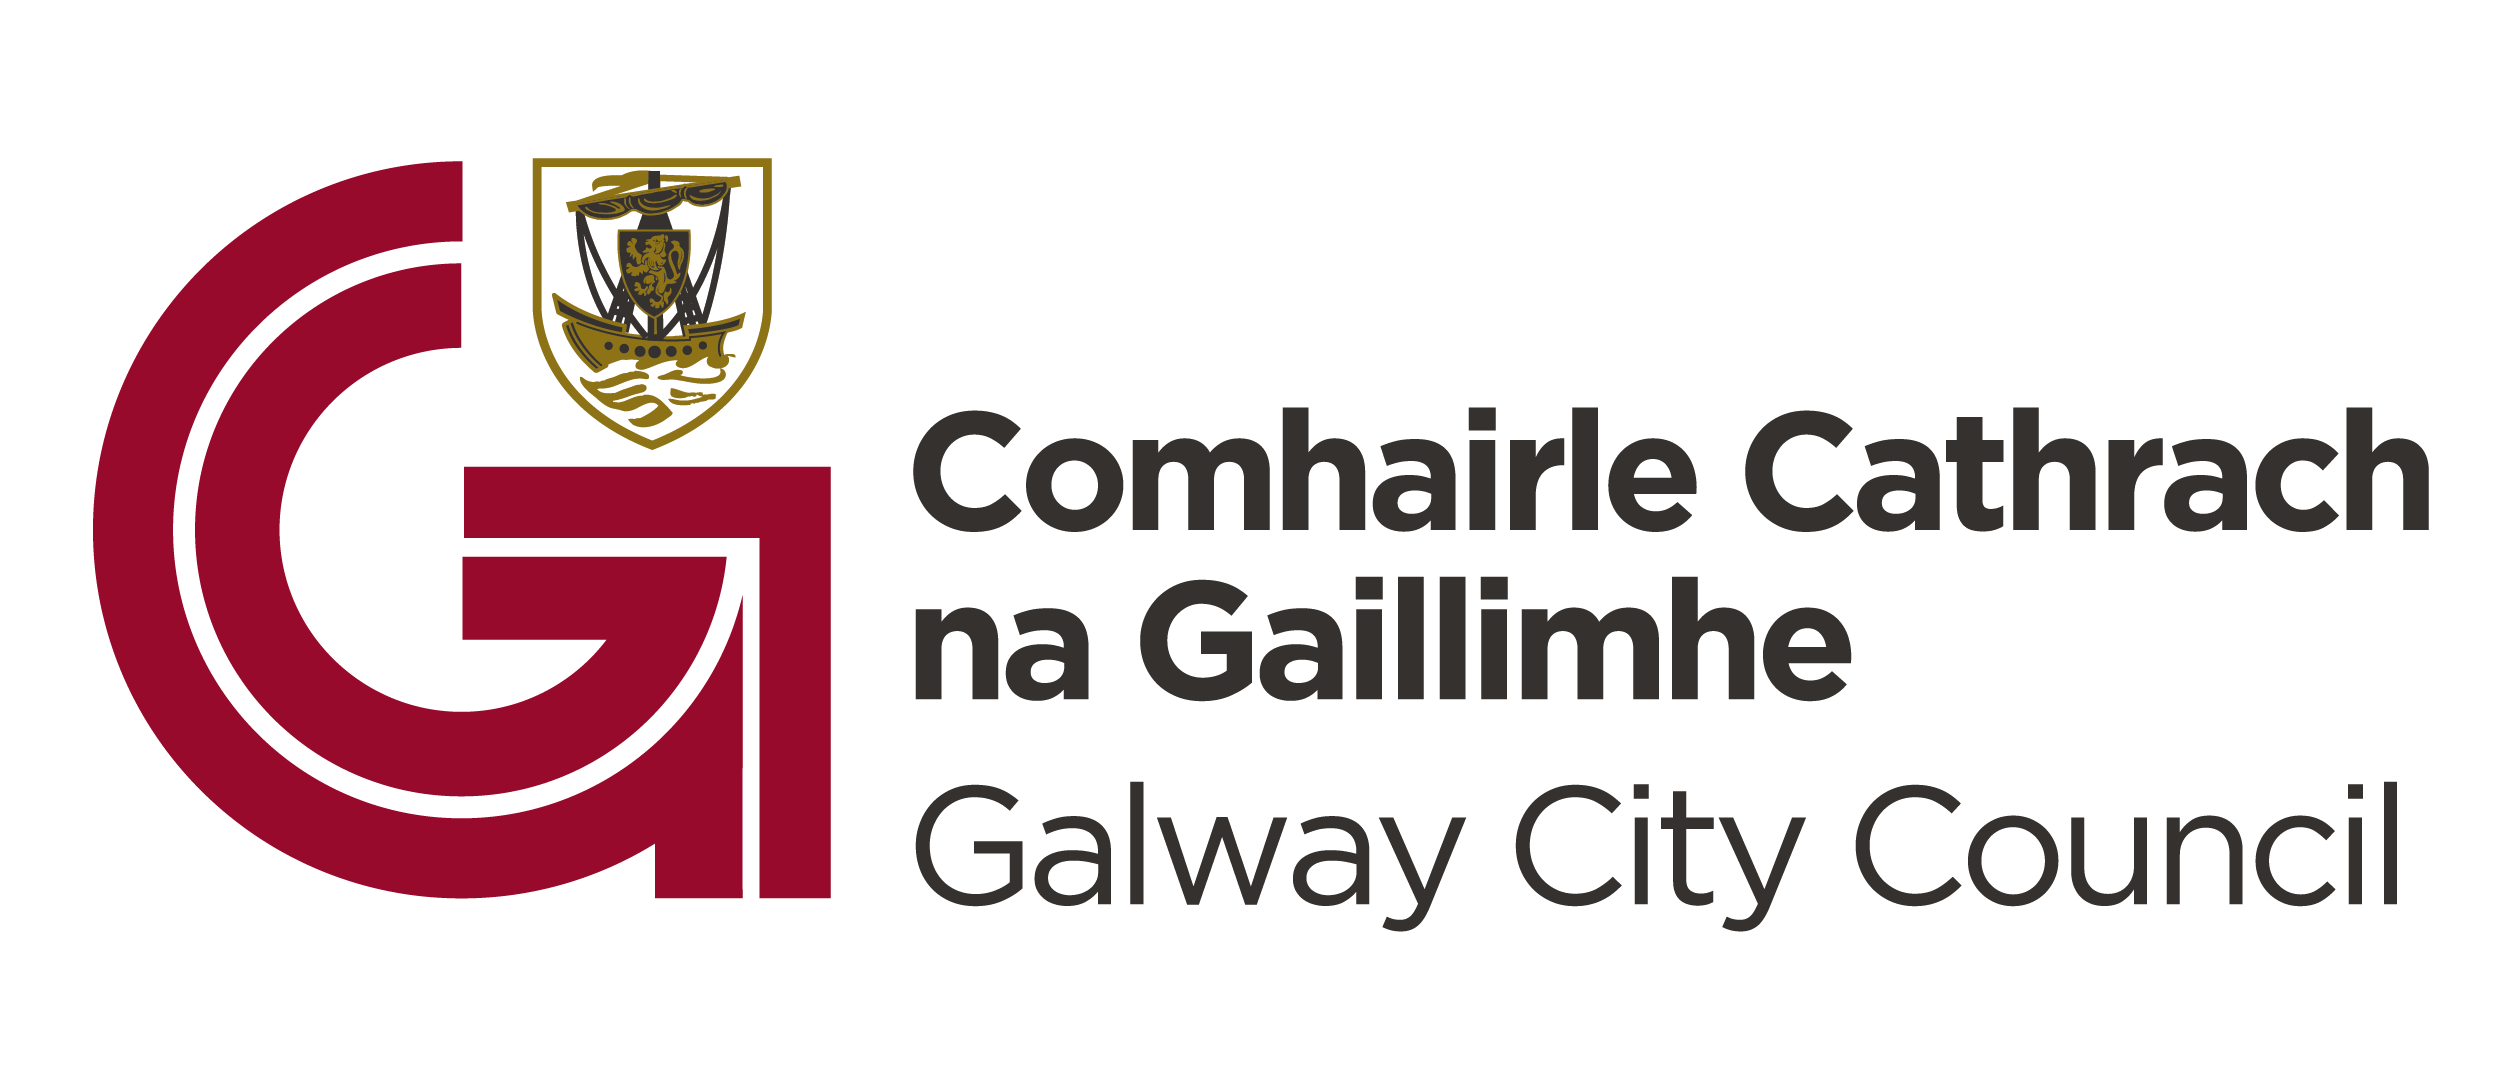 galway-council-logo